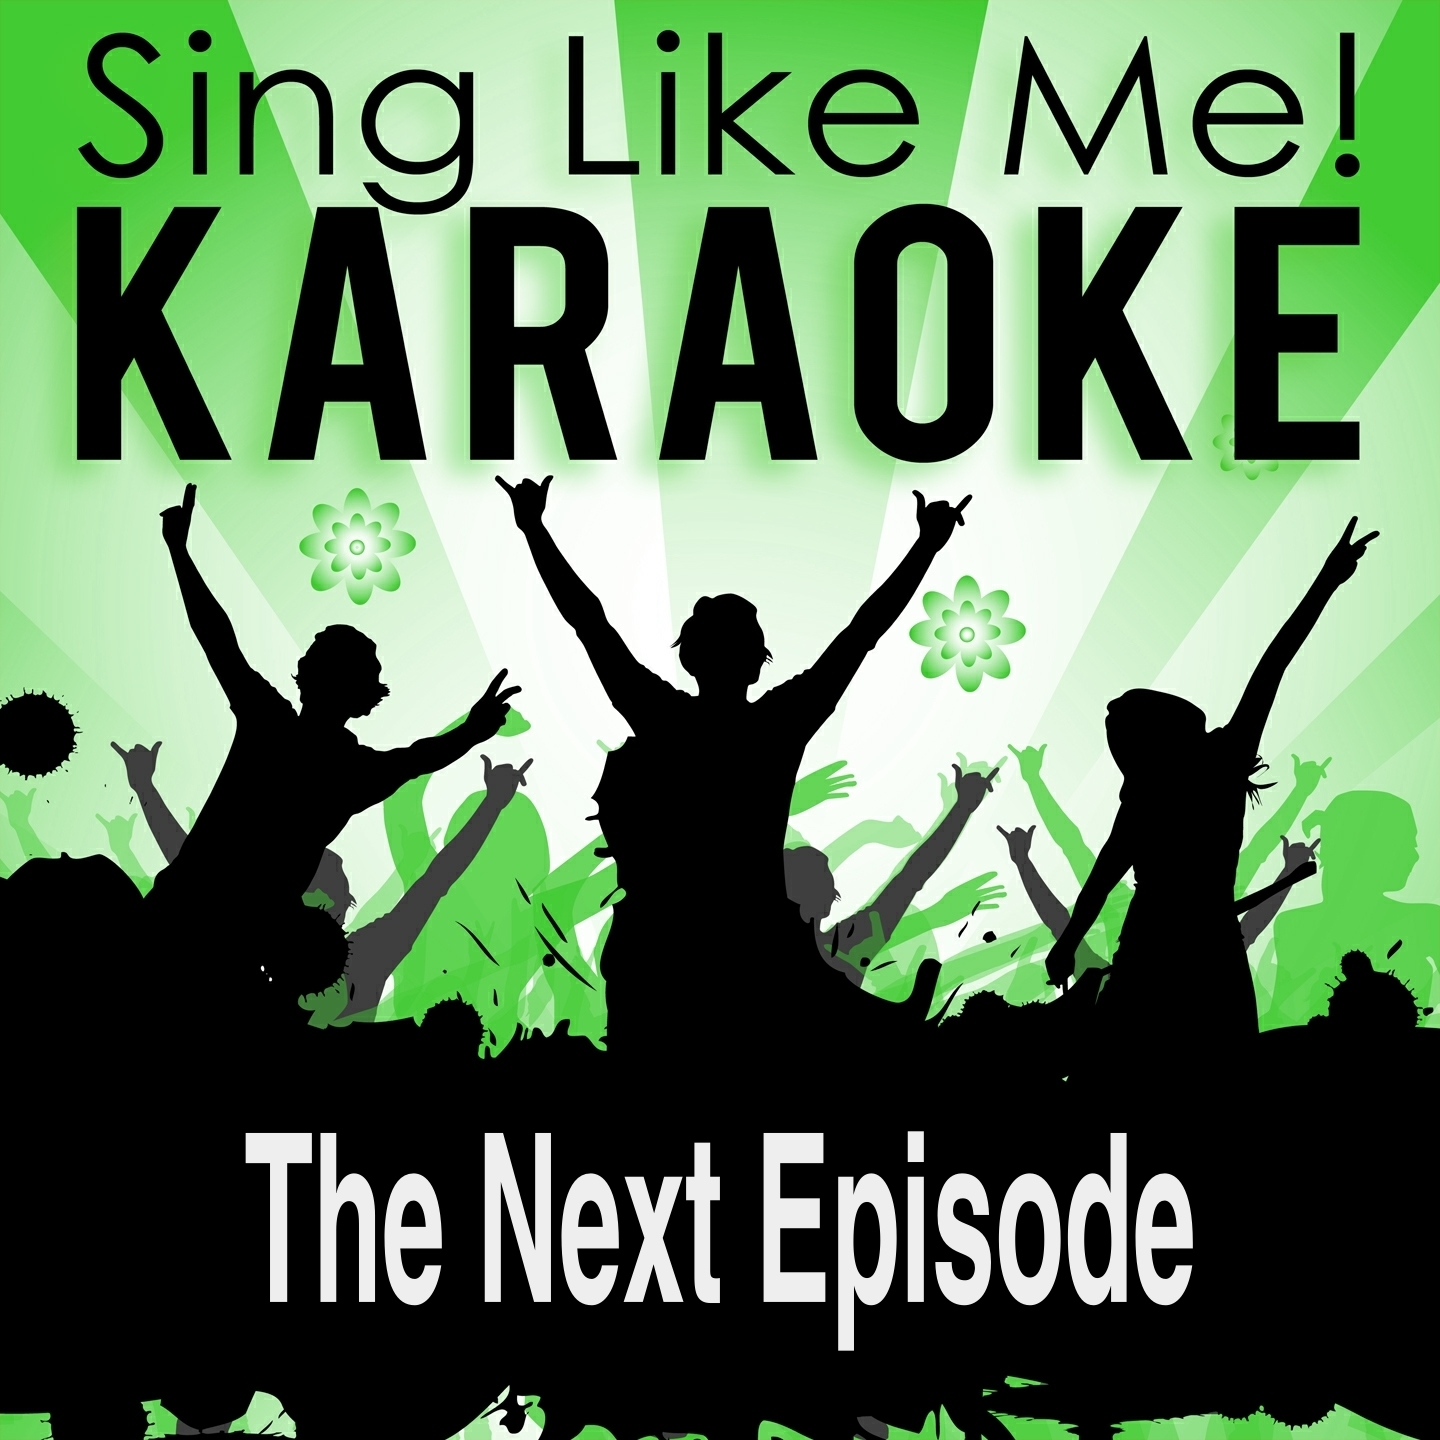 The Next Episode (Karaoke Version with Guide Melody) (Originally Performed By Dr. Dre, Snoop Dogg & Nate Dogg)